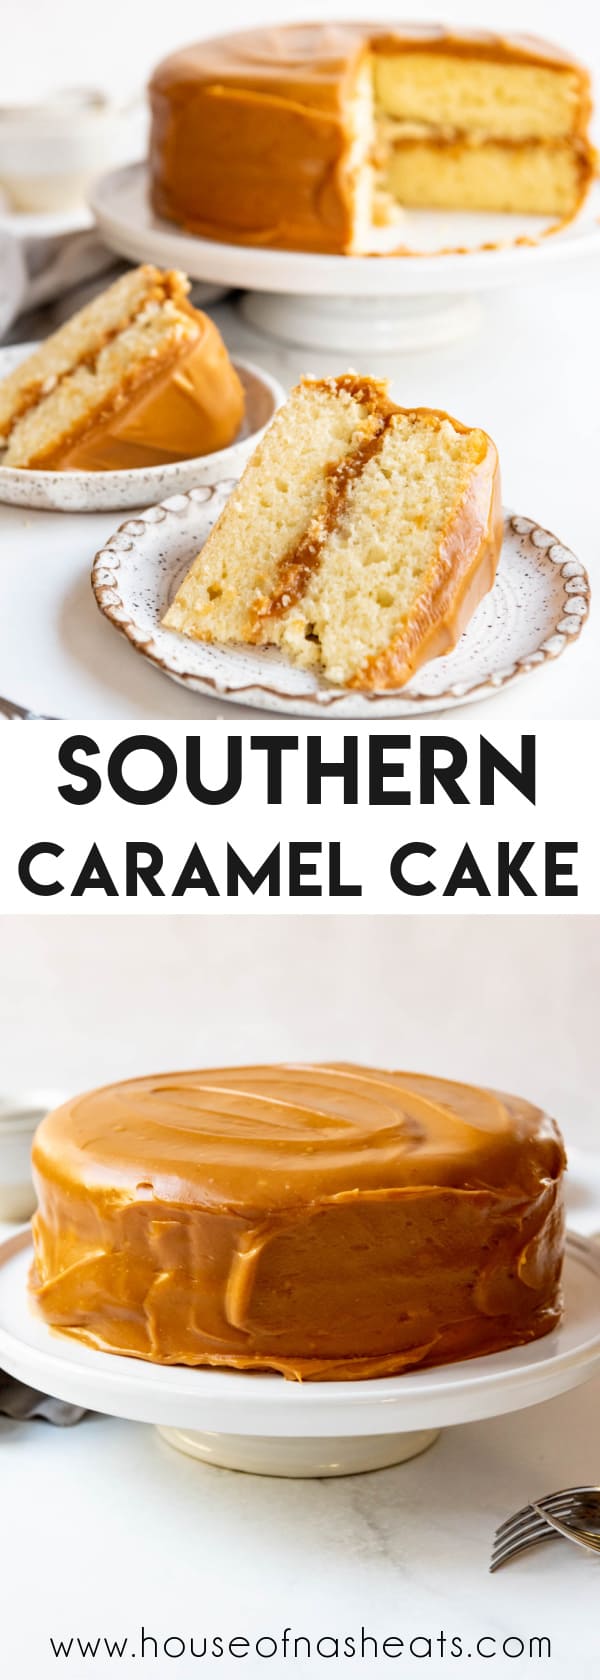 A collage of images of caramel cake with text overlay.